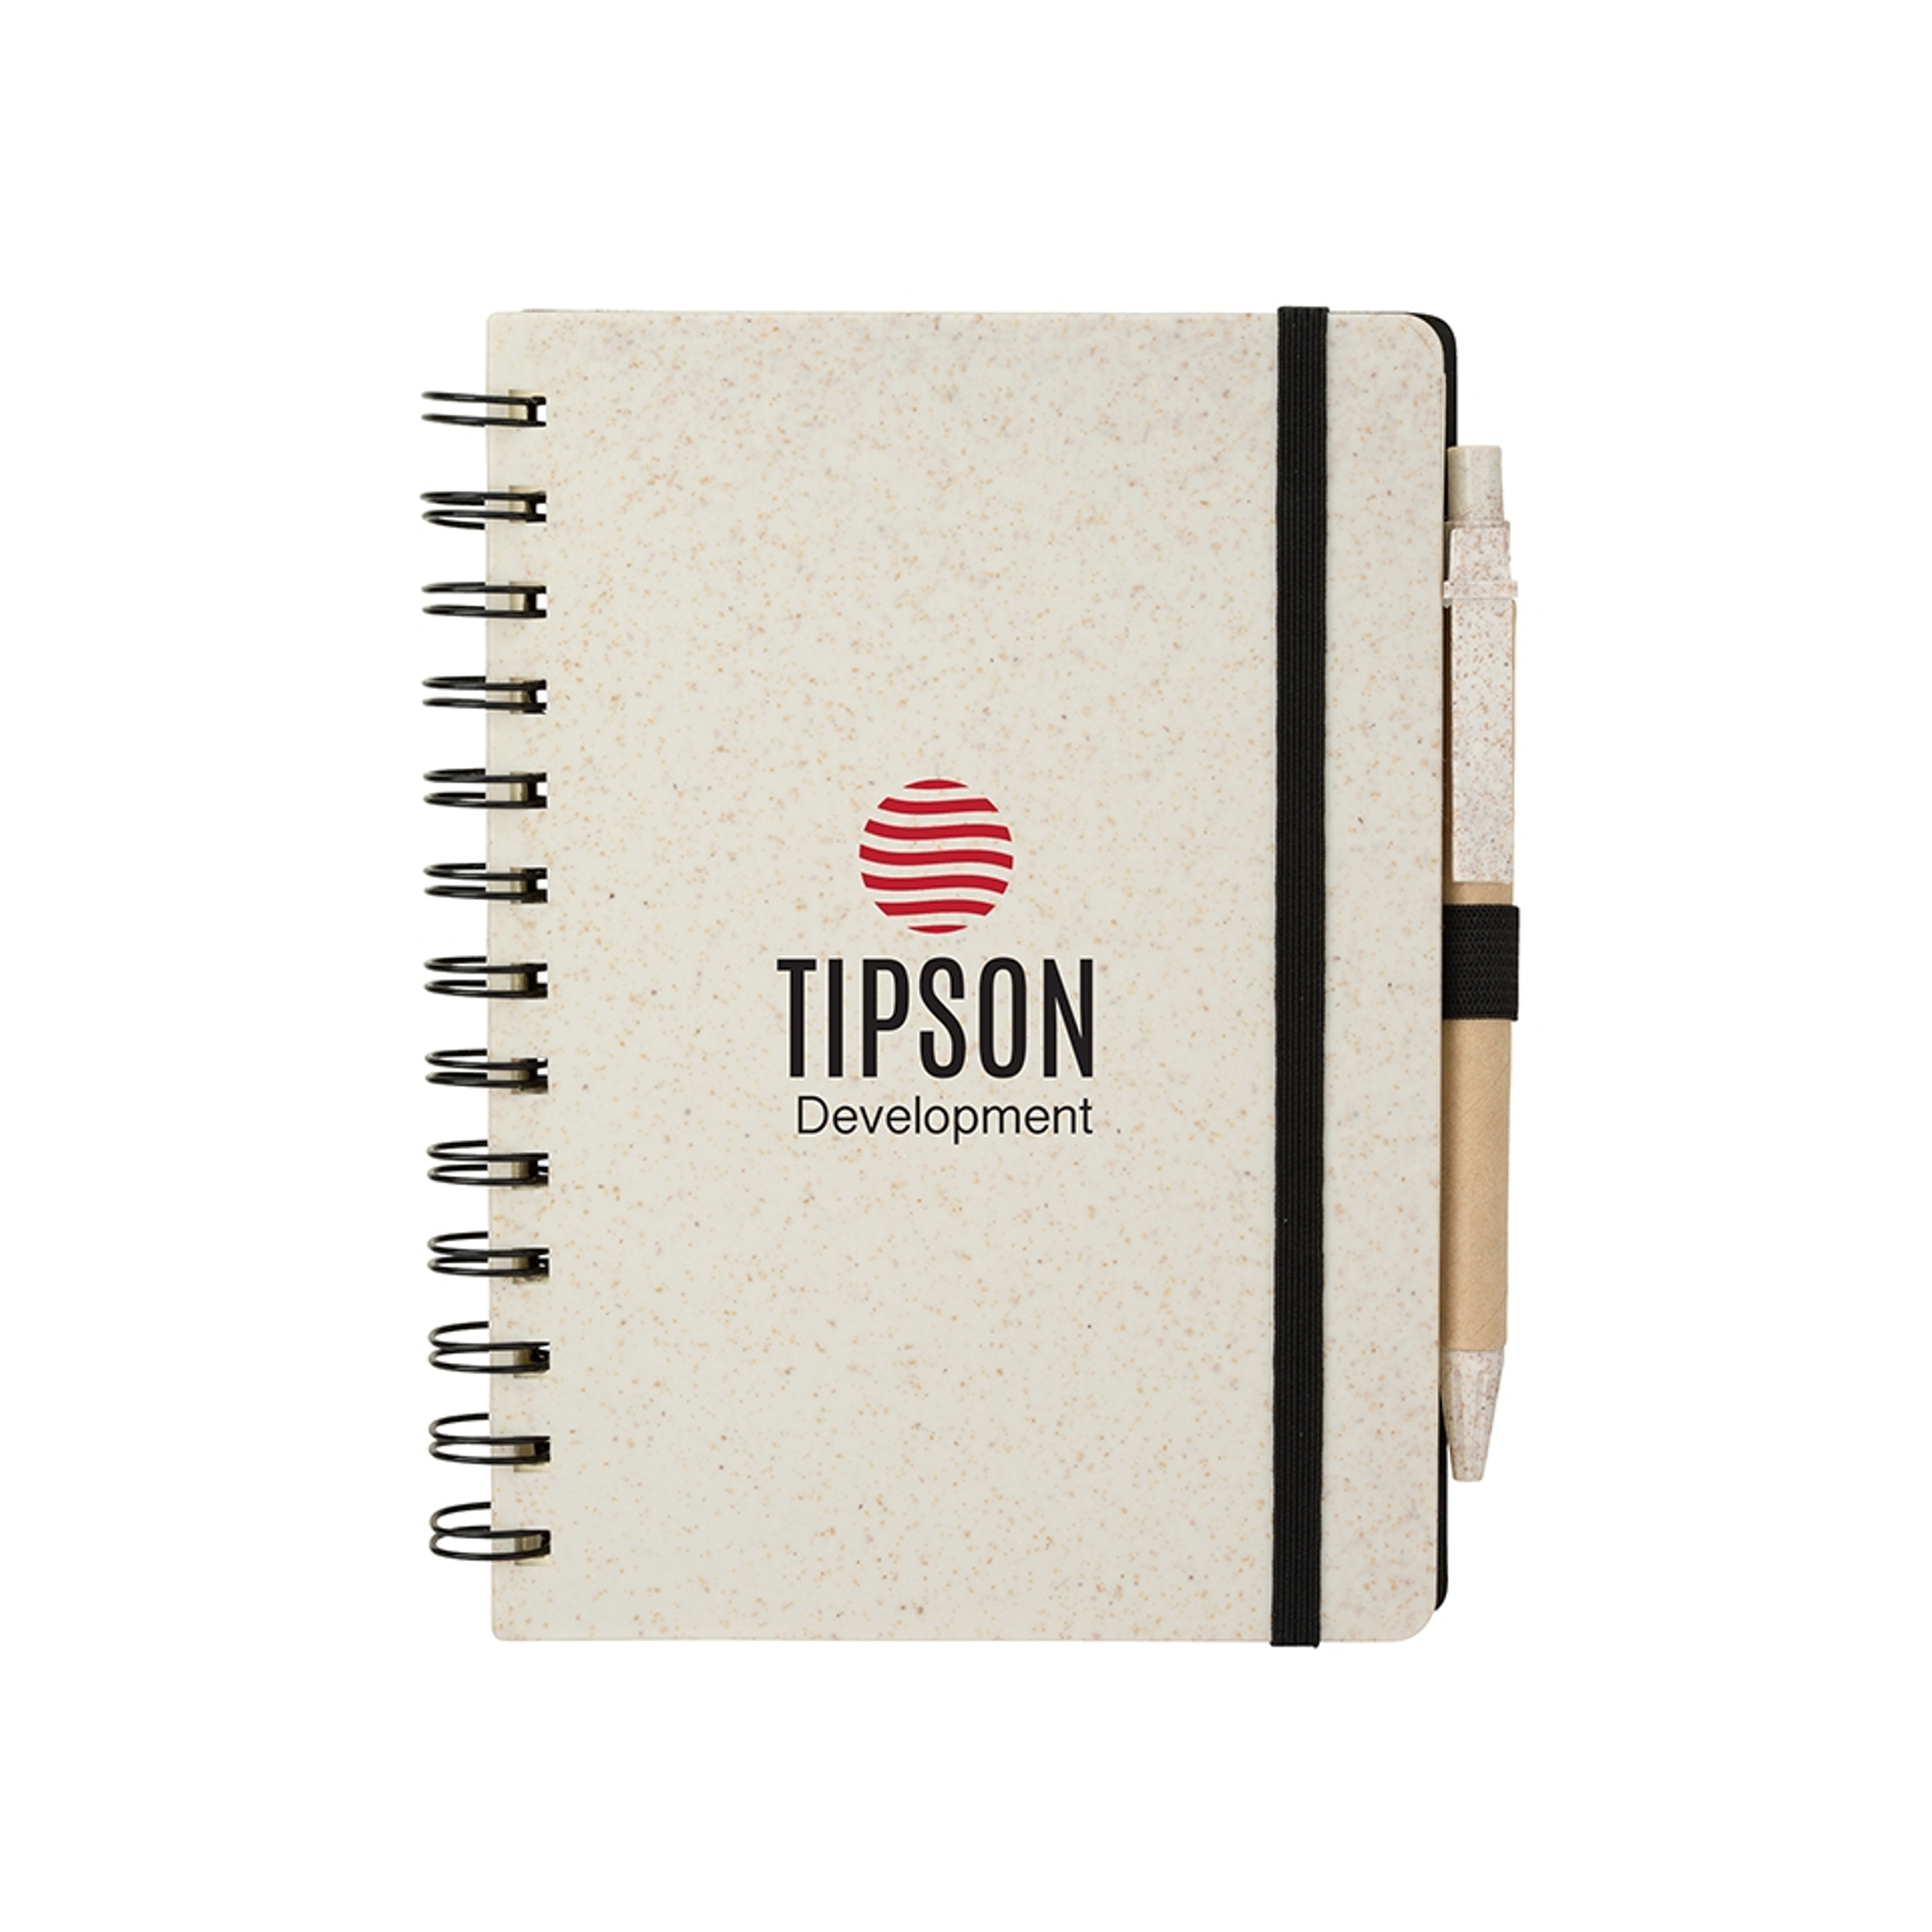 Personalized Eco-Friendly Wheat Straw Notebook & Pen | 6 x 7 